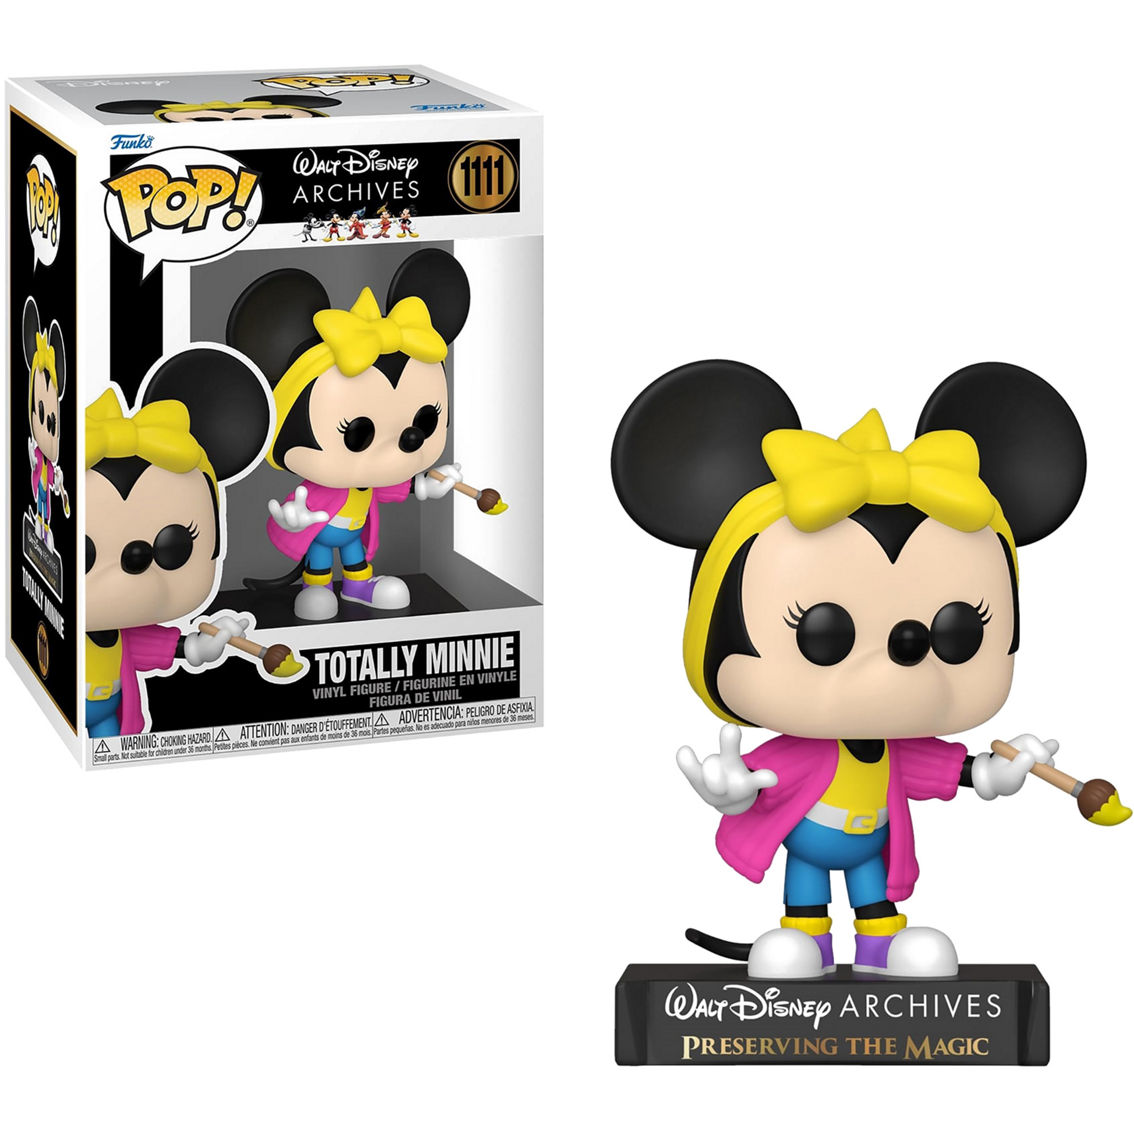 Funko POP! Disney Minnie Mouse Collector Set - Image 4 of 5